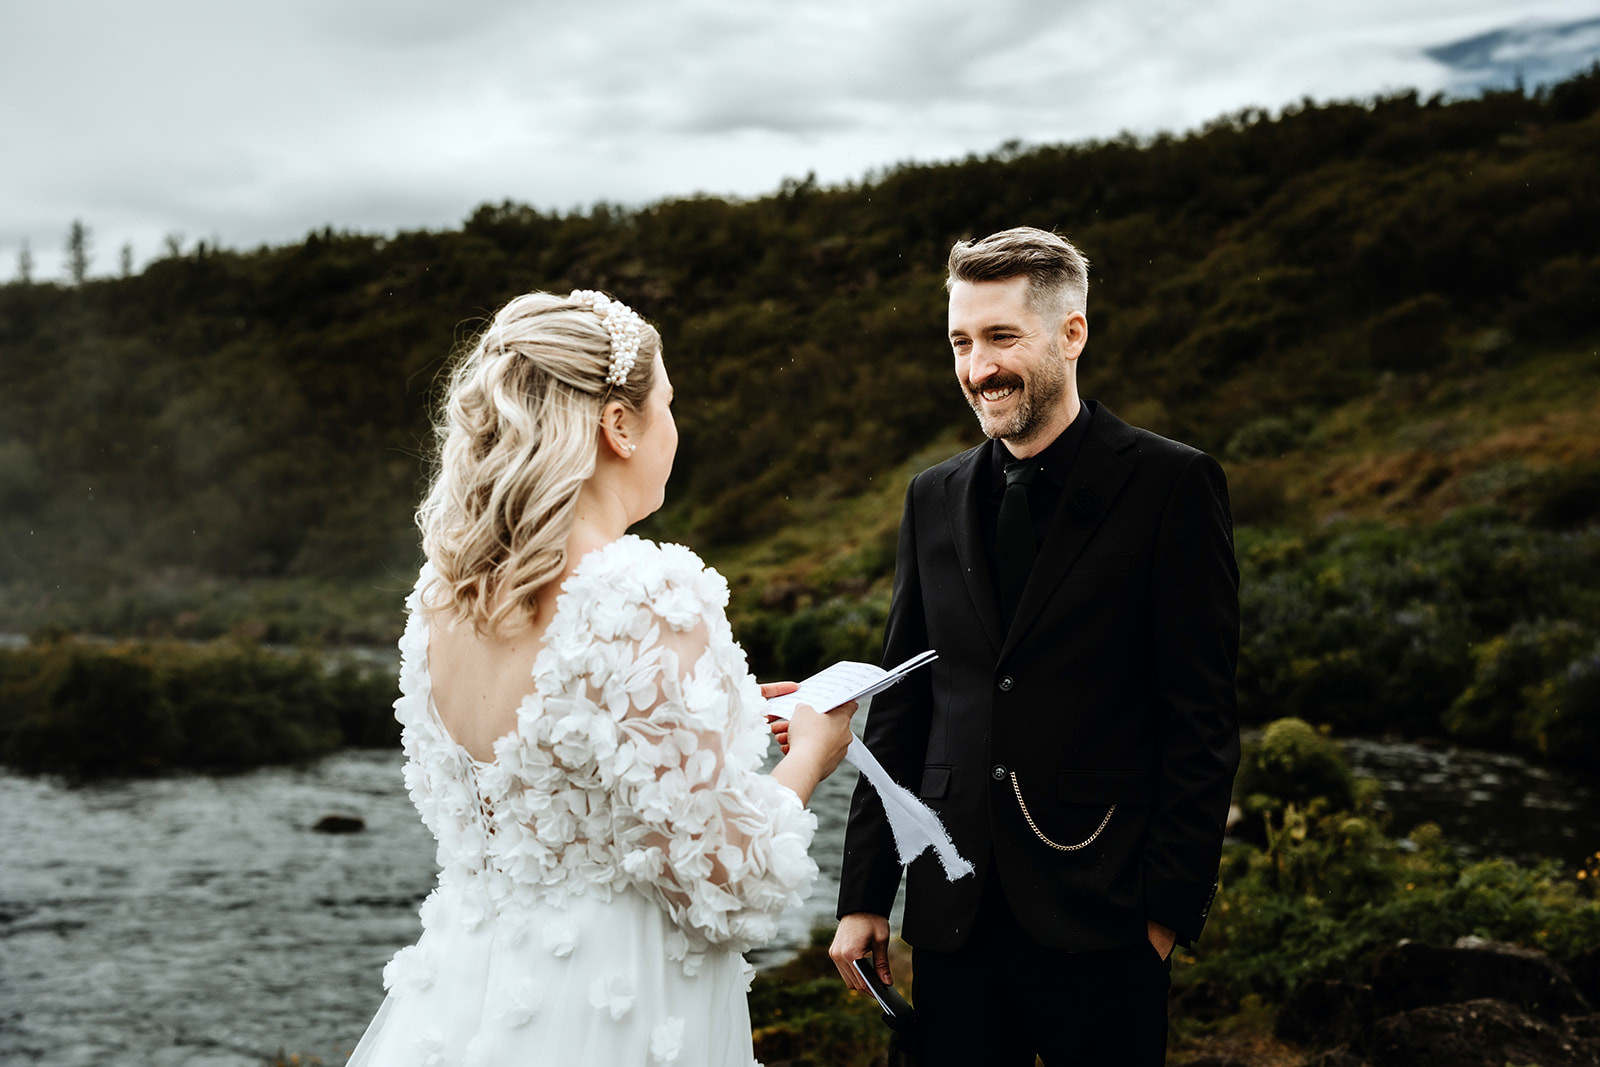 Waterfall ceremony in Iceland. Bride and groom are standing in front of a waterfall and exchanging their vows.